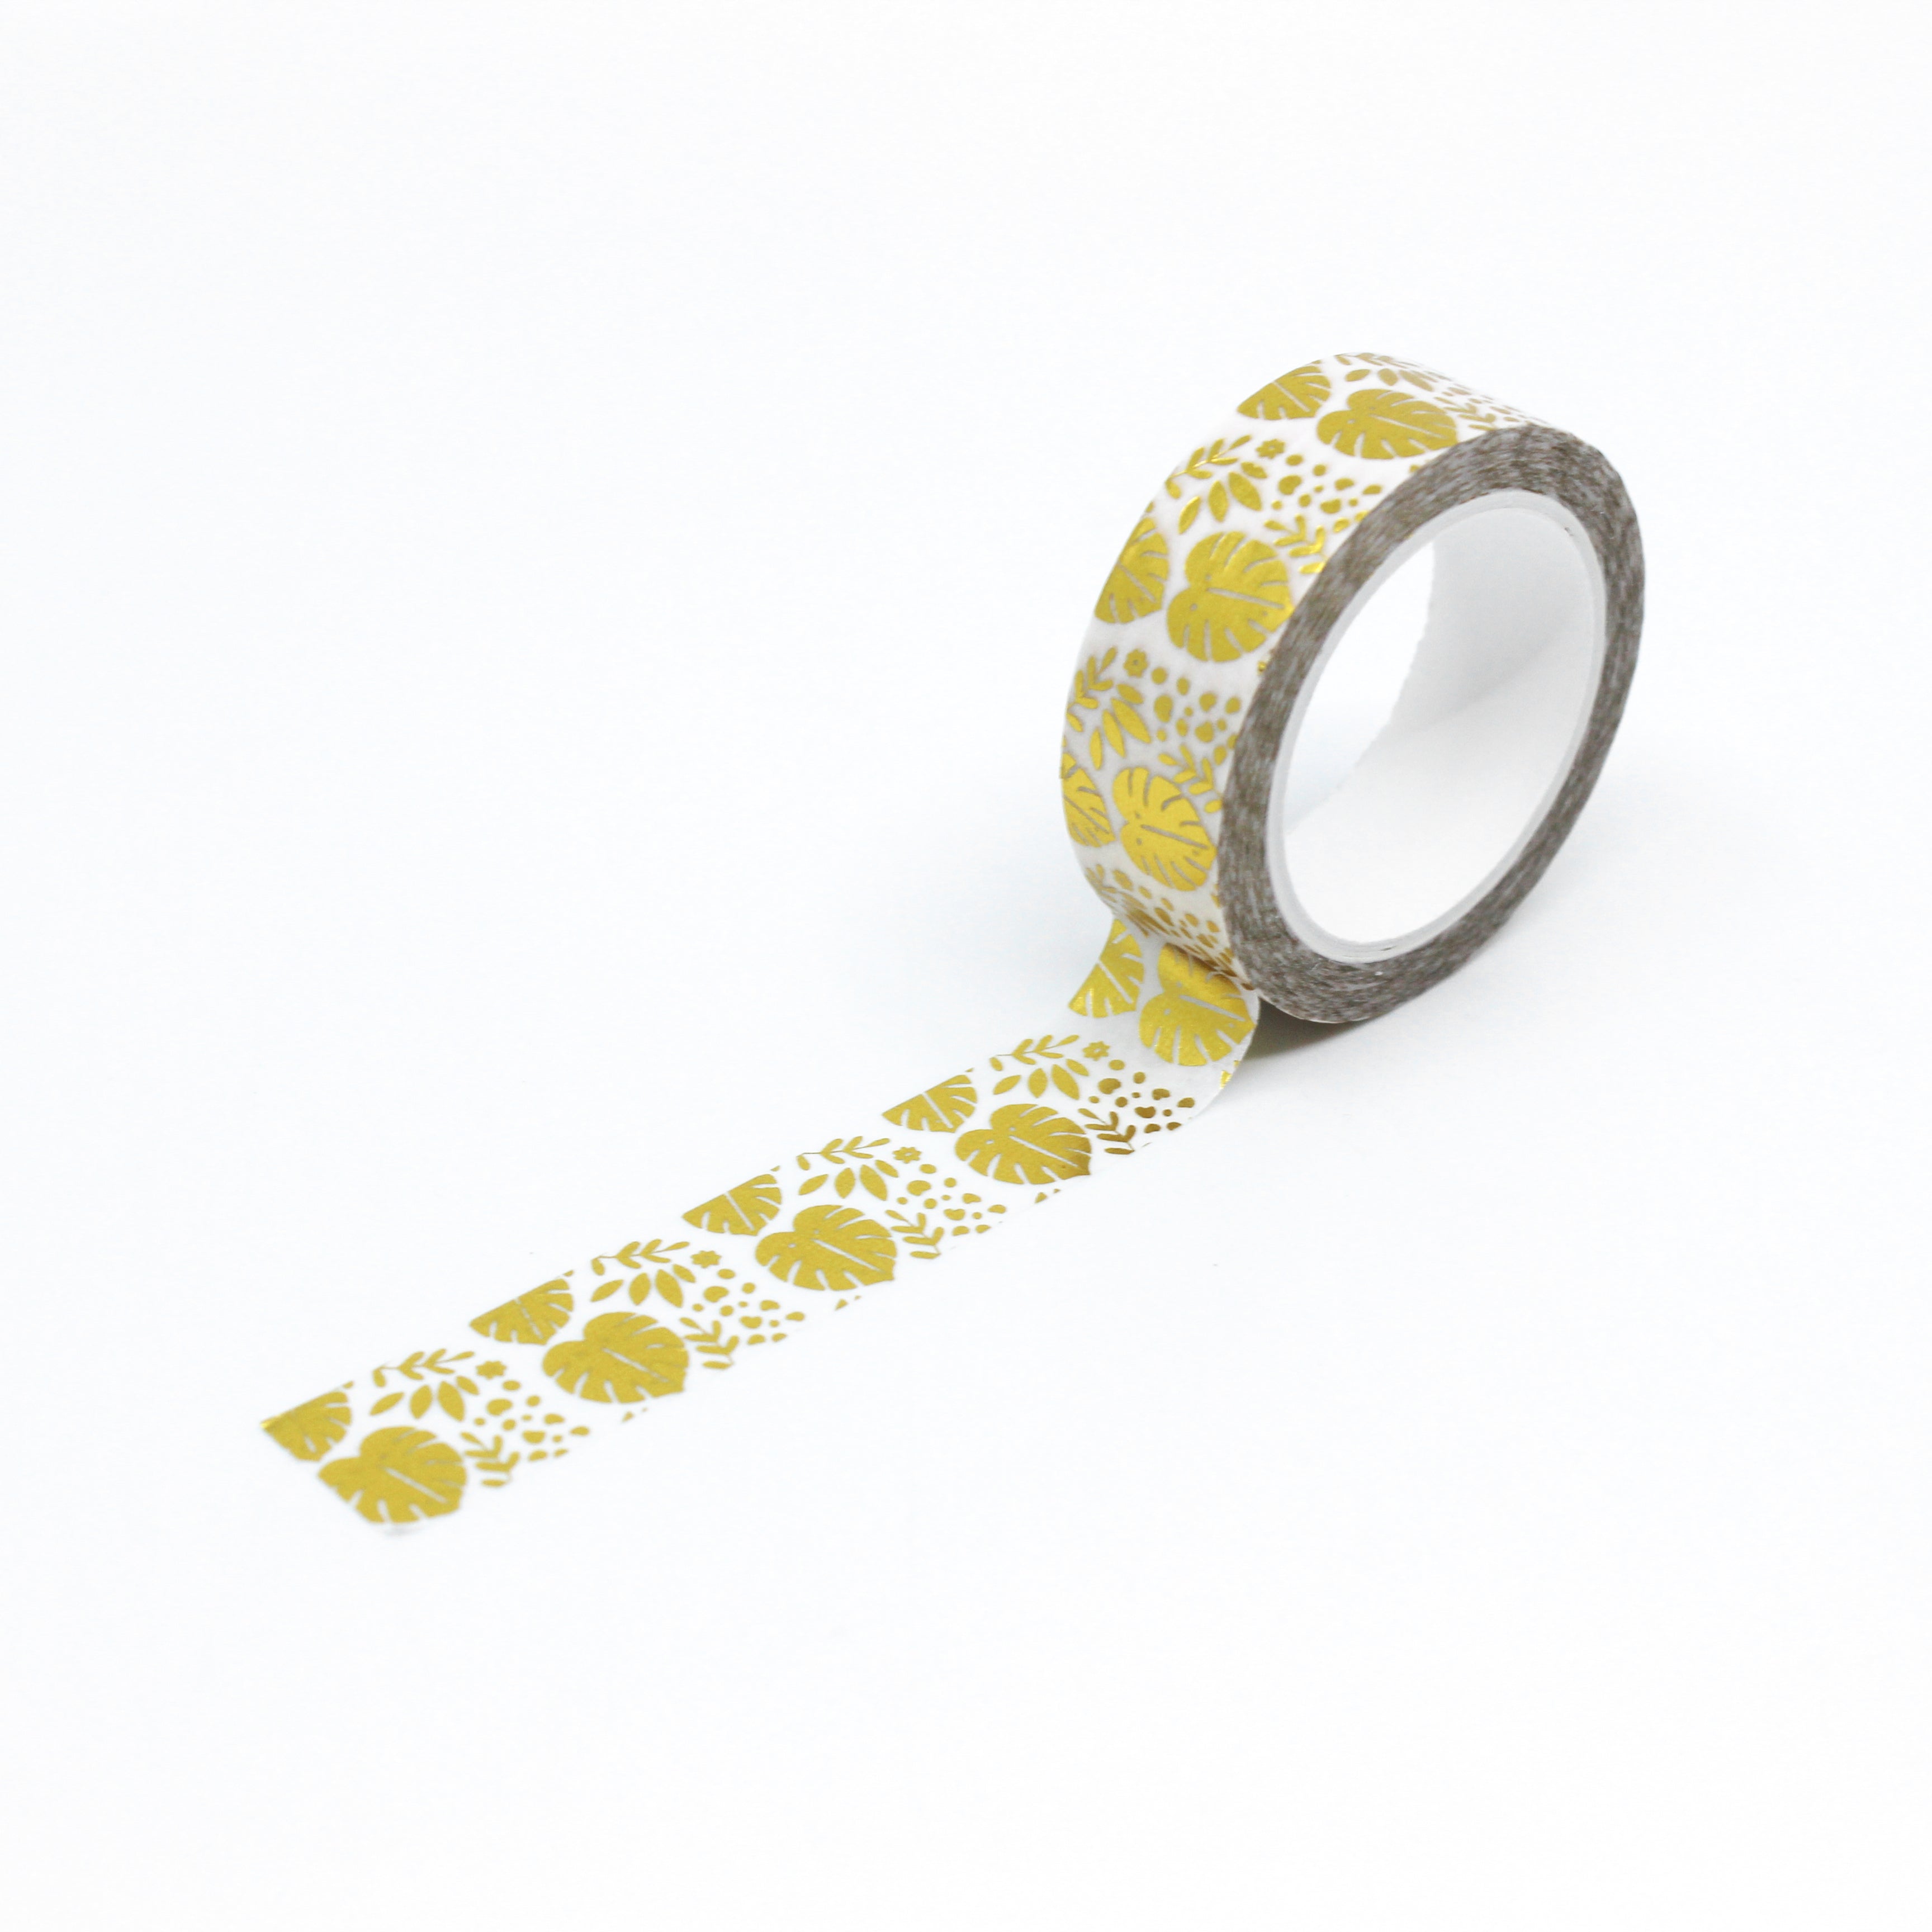 This is a photo of a gold foil monstera Succulent leaf roll of washi tape from BBB Supplies craft and journaling supply shop.